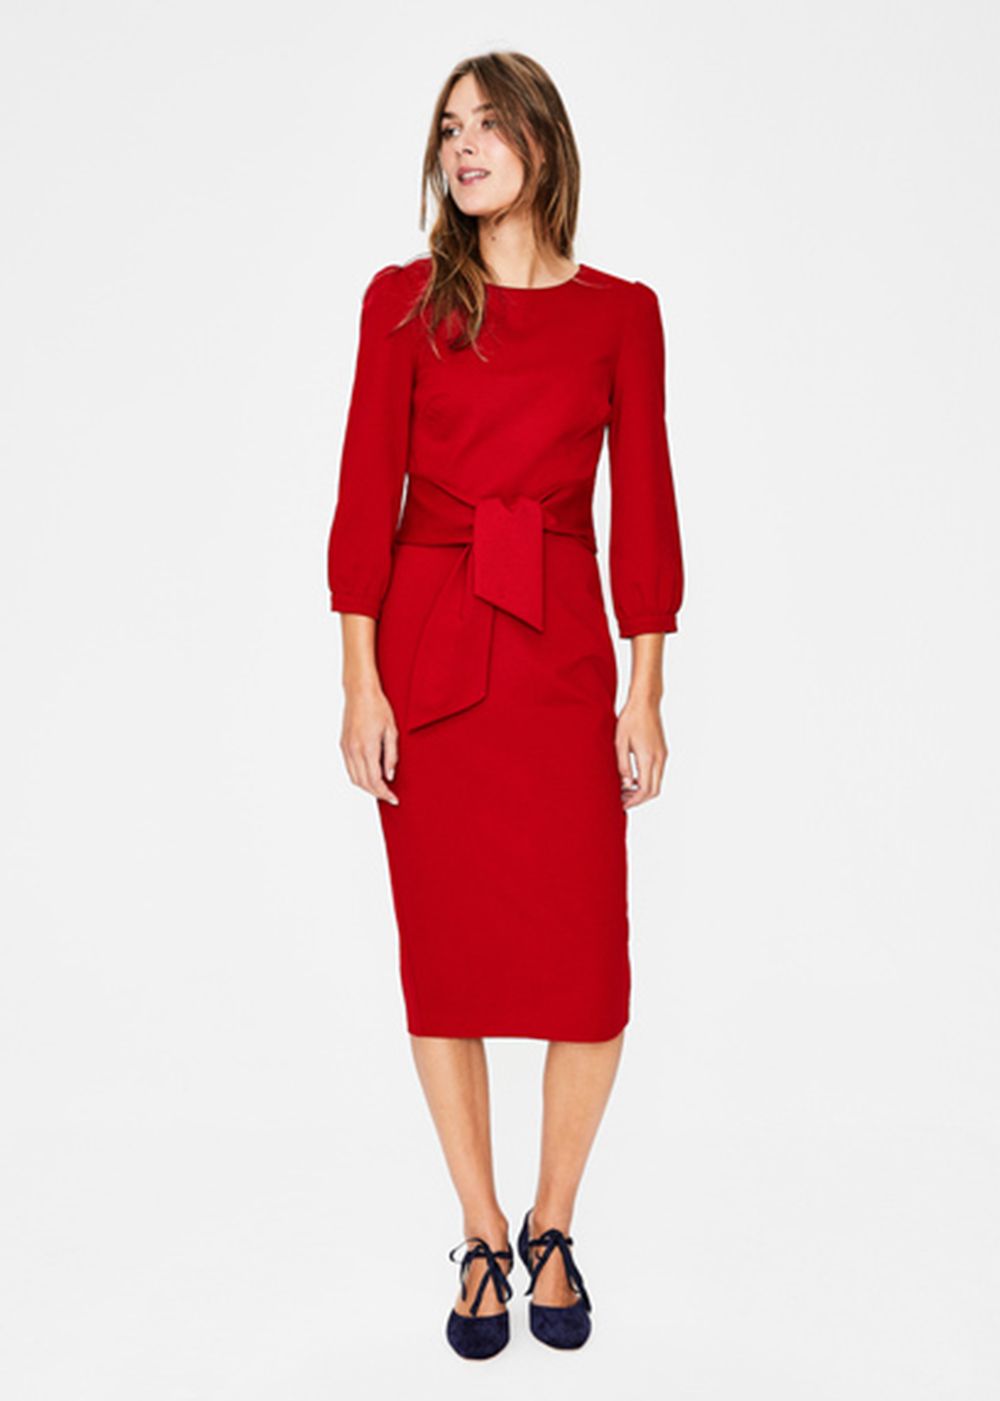 boden red dress with sleeves